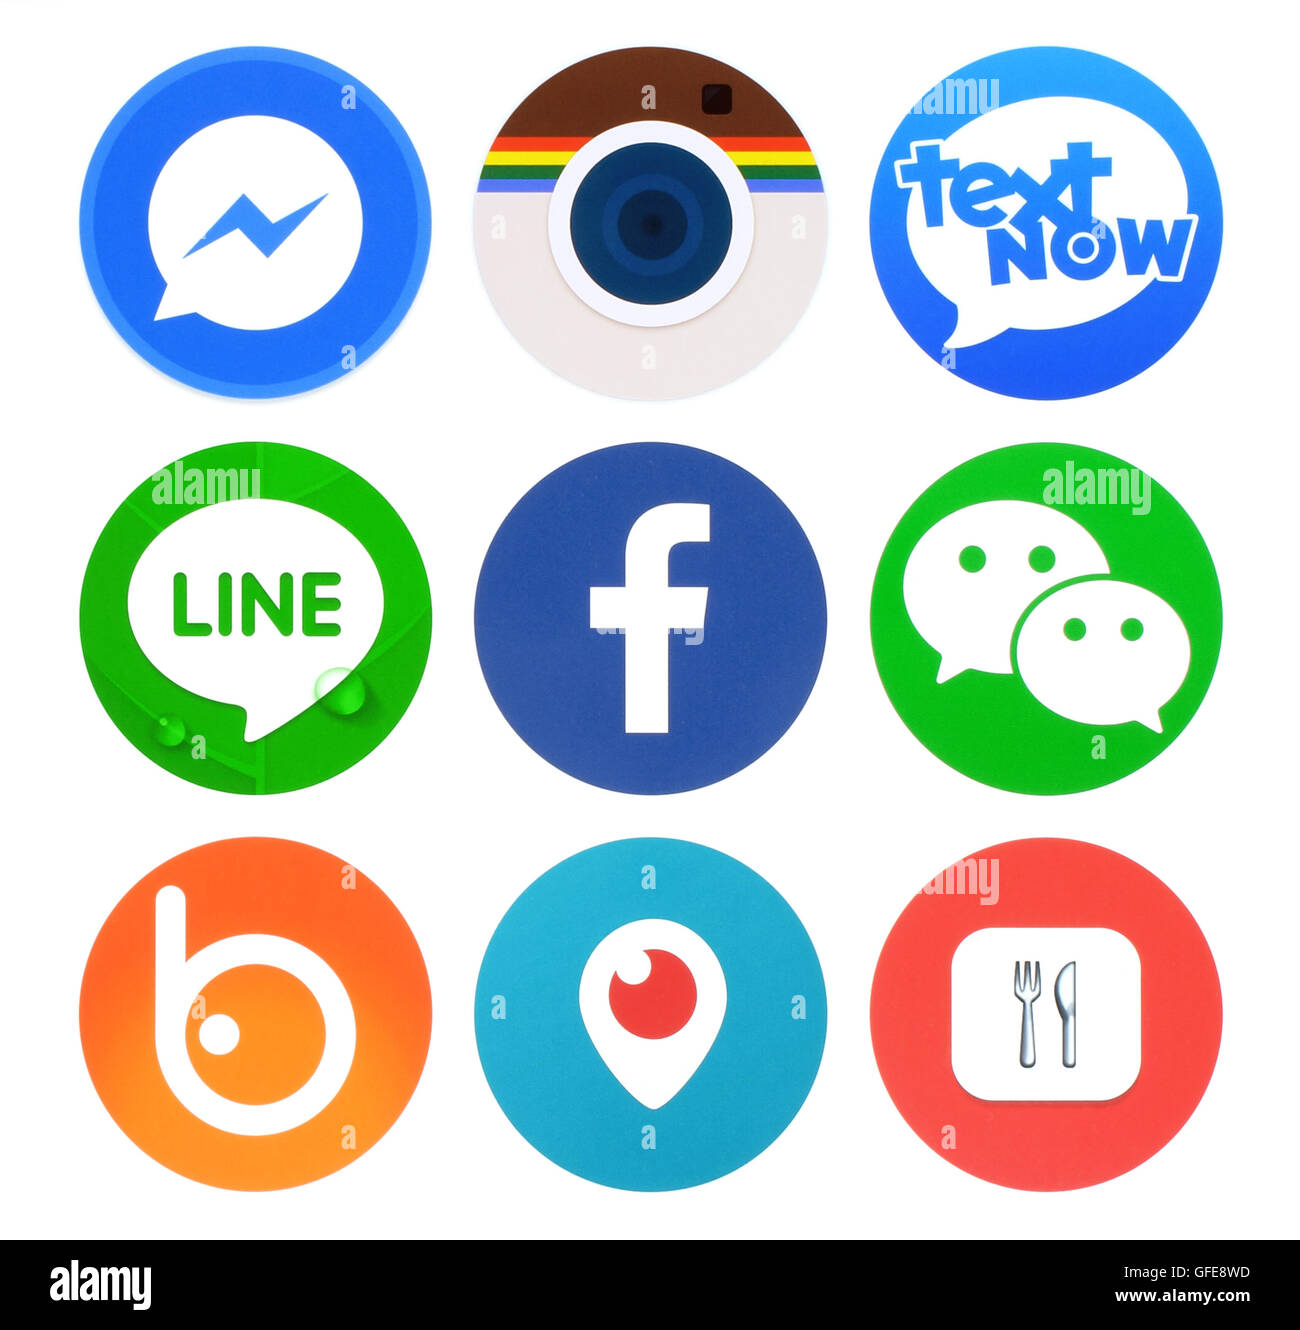 Kiev, Ukraine - April 22, 2016: Collection of popular round social networking icons, printed on paper: Facebook, Messenger, etc. Stock Photo